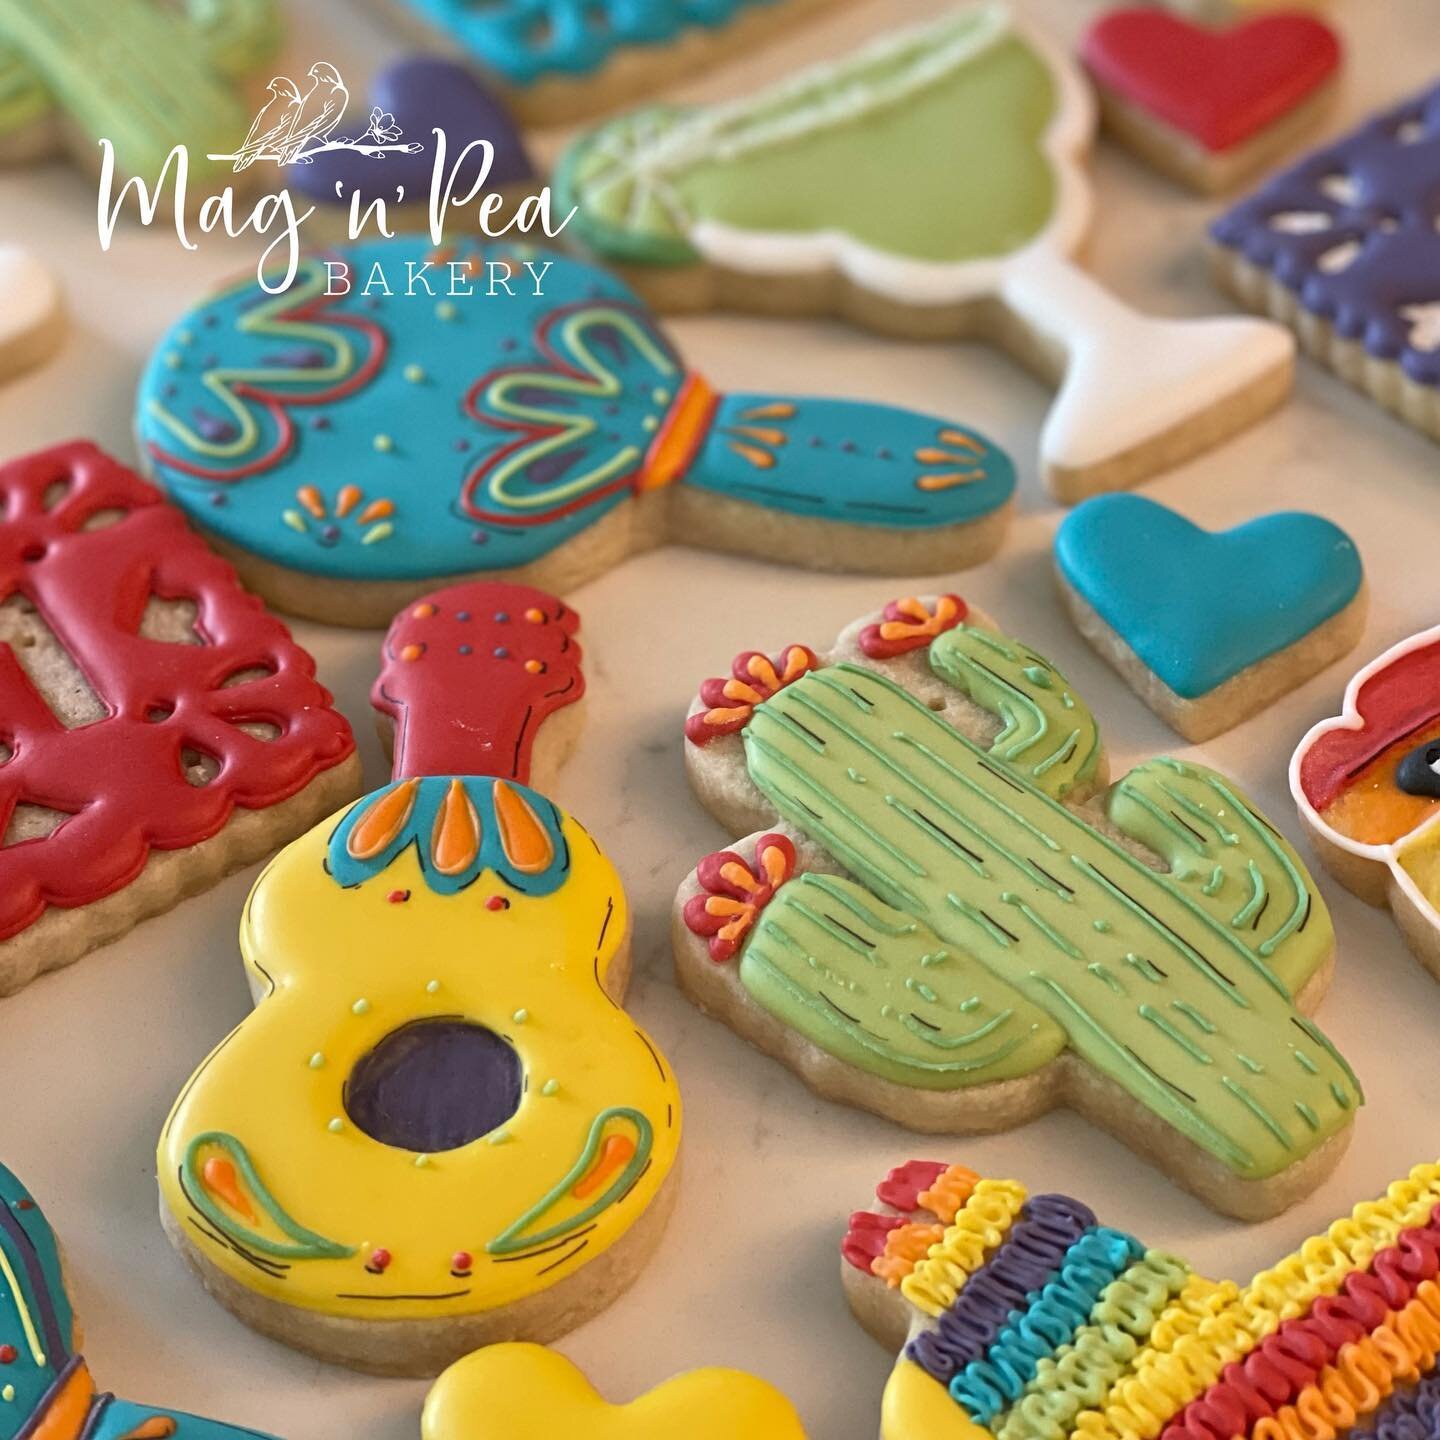 I&rsquo;ve been decorating cookies for a few years now and it&rsquo;s the first time I&rsquo;ve been asked to do Mexican fiesta style cookies. I was so excited! I know what you&rsquo;re thinking - they&rsquo;re for 5 de mayo. But in reality, they wer